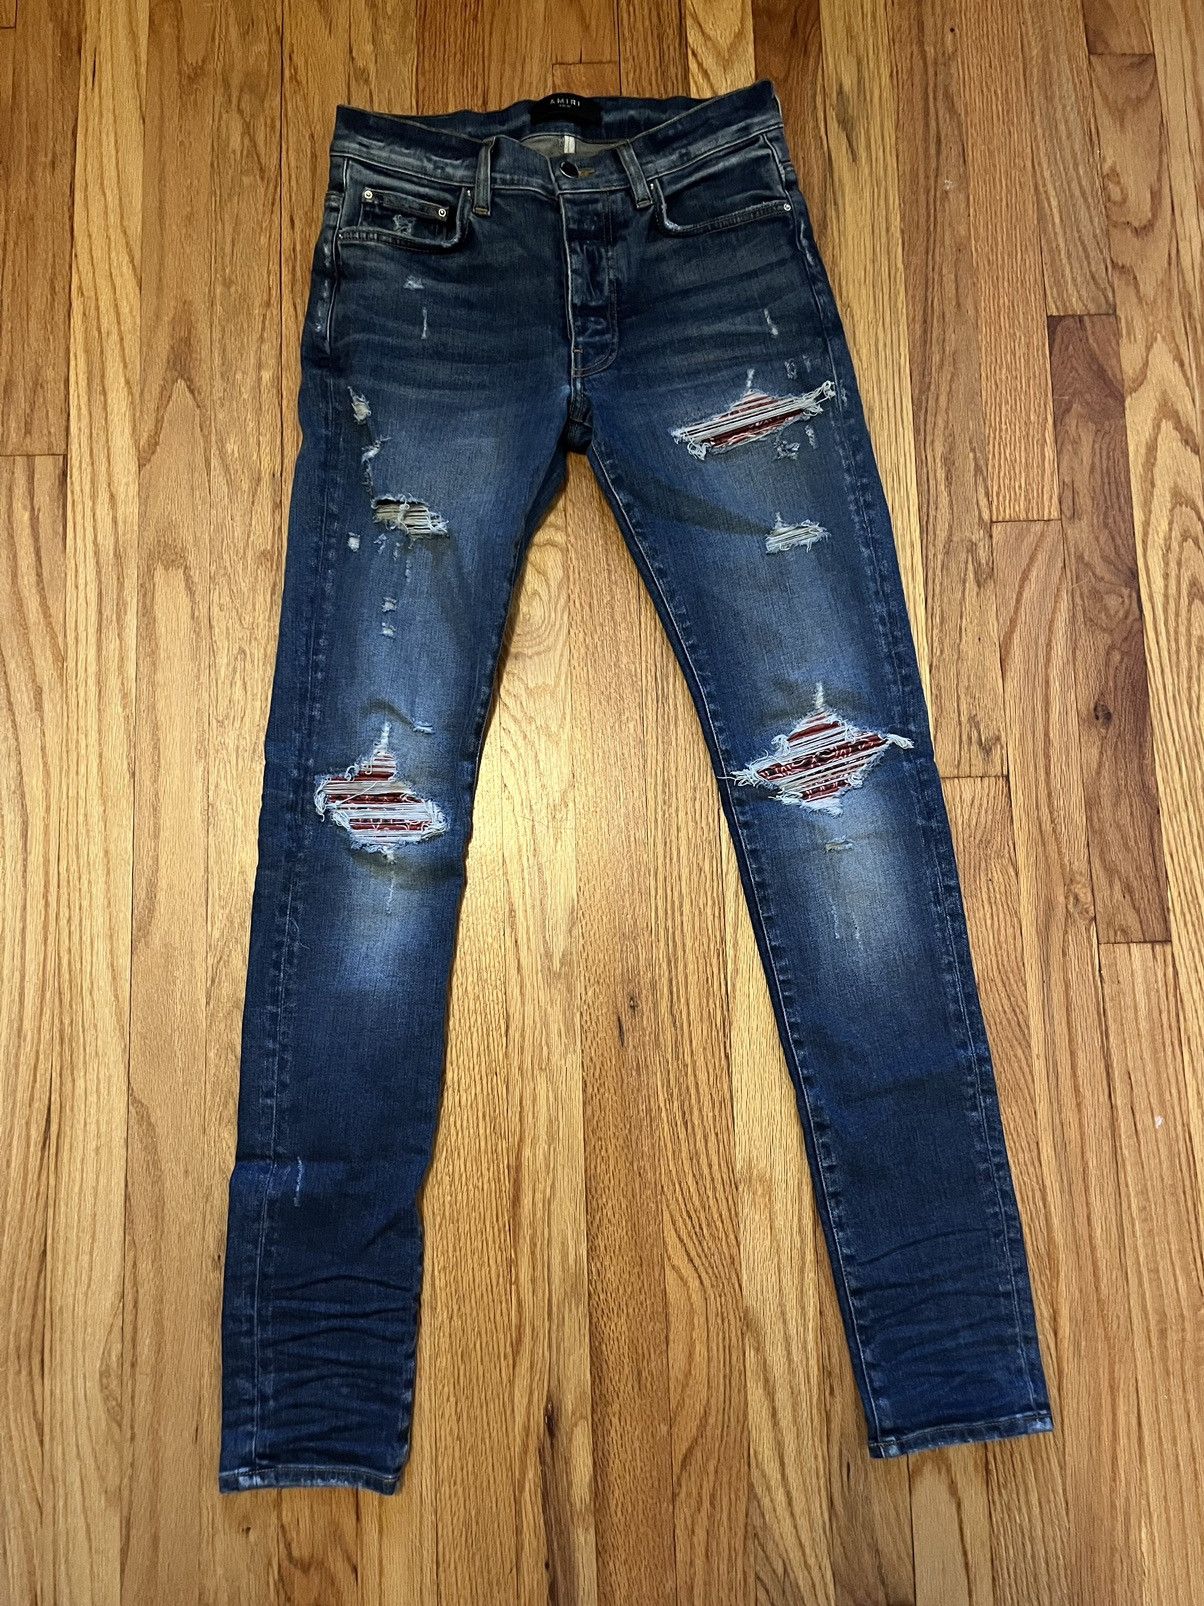 Pre-owned Amiri Jeans Blue Mx1 Red Bandana Patch